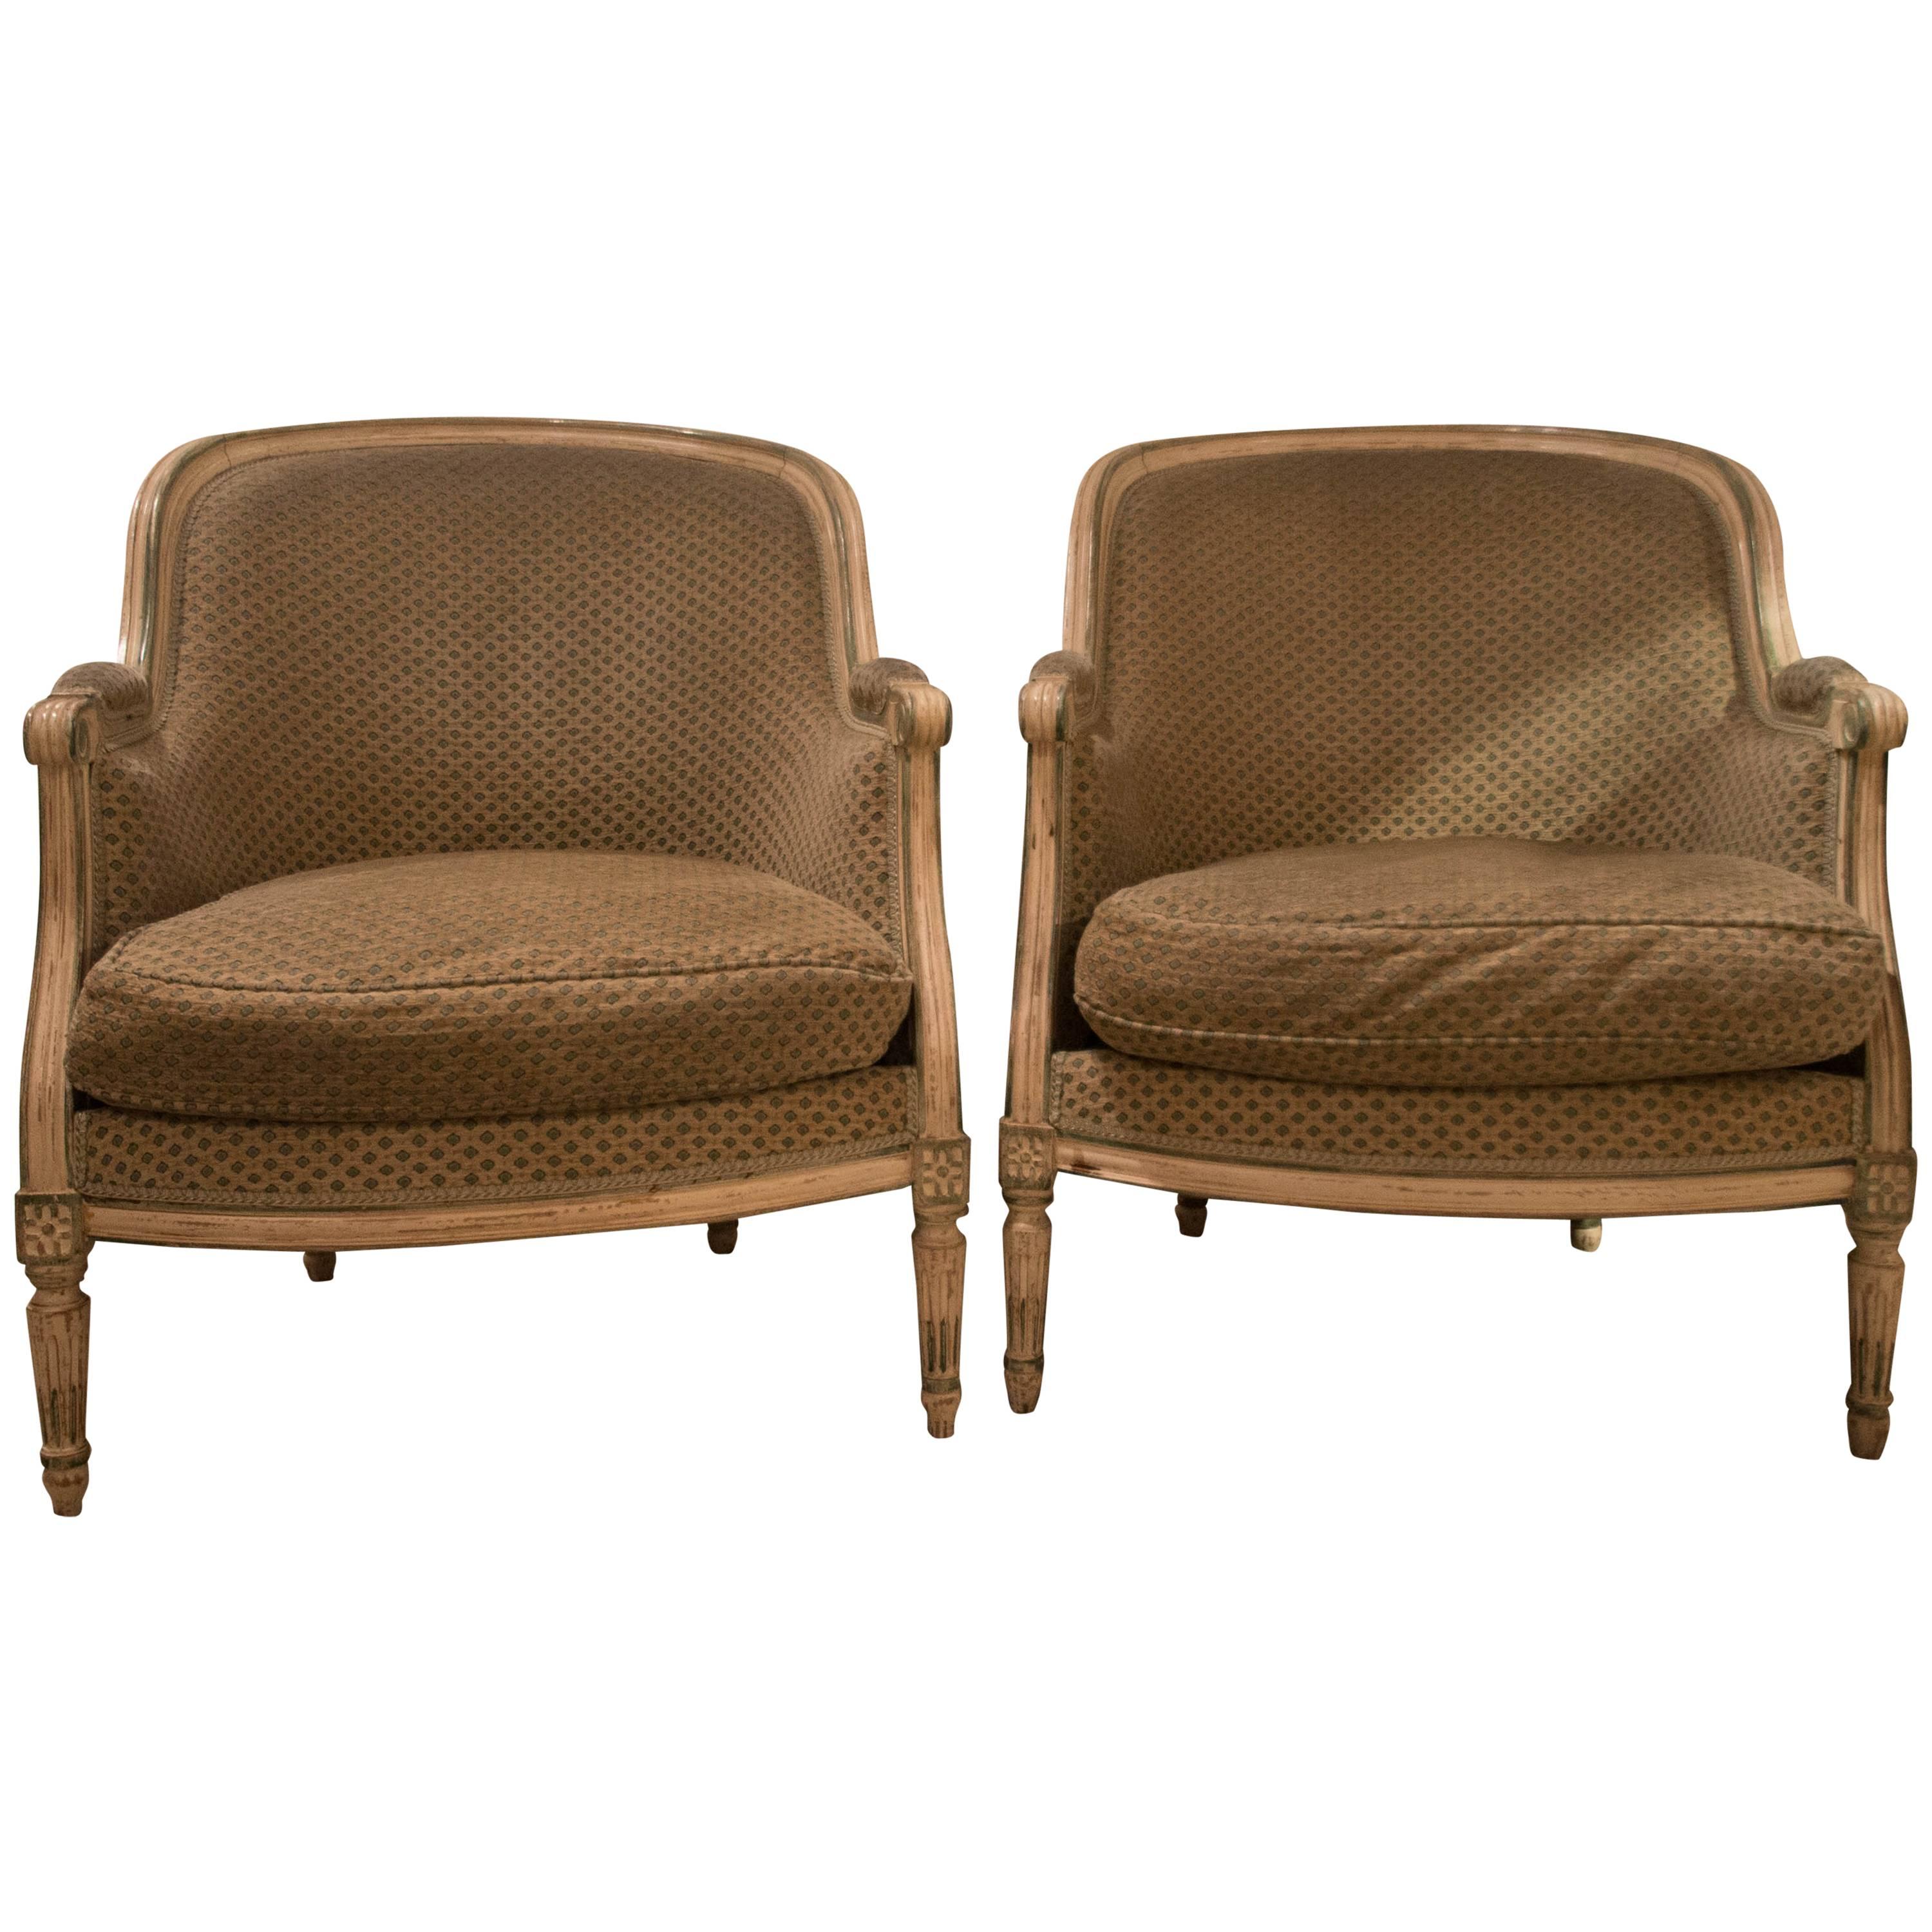 Pair of Louis XVI Style French Bergere Chairs